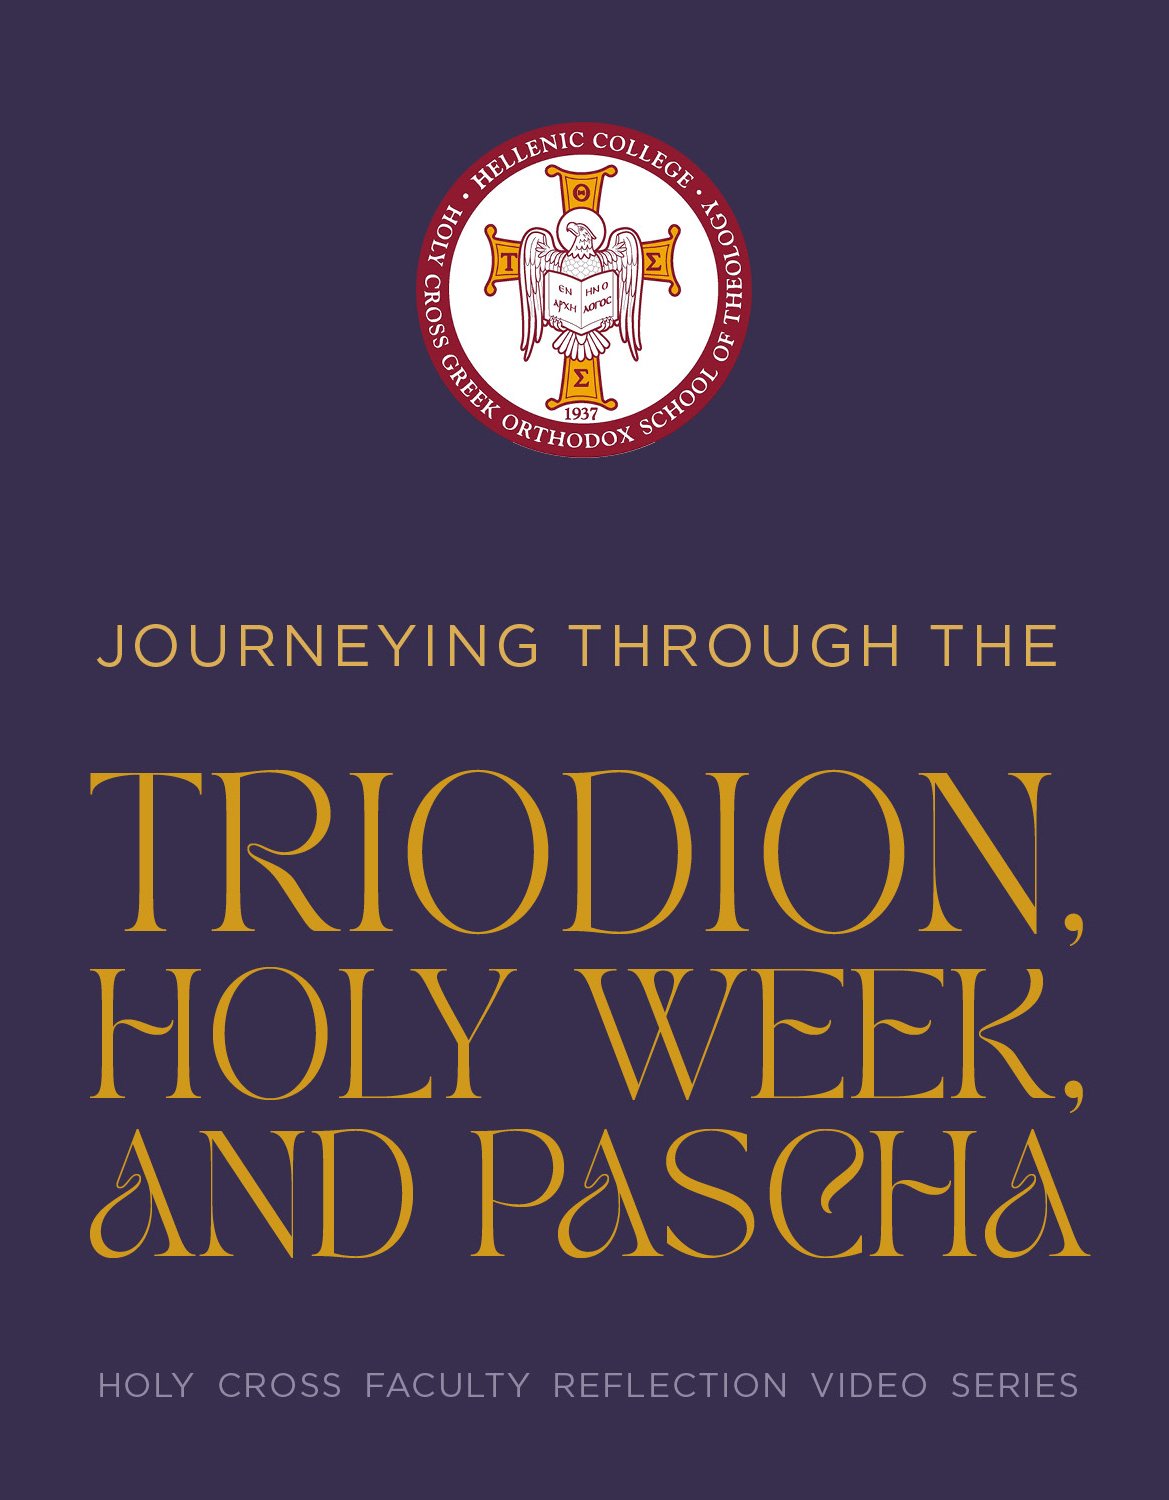 Journeying Through the Triodion, Holy Week and Pascha